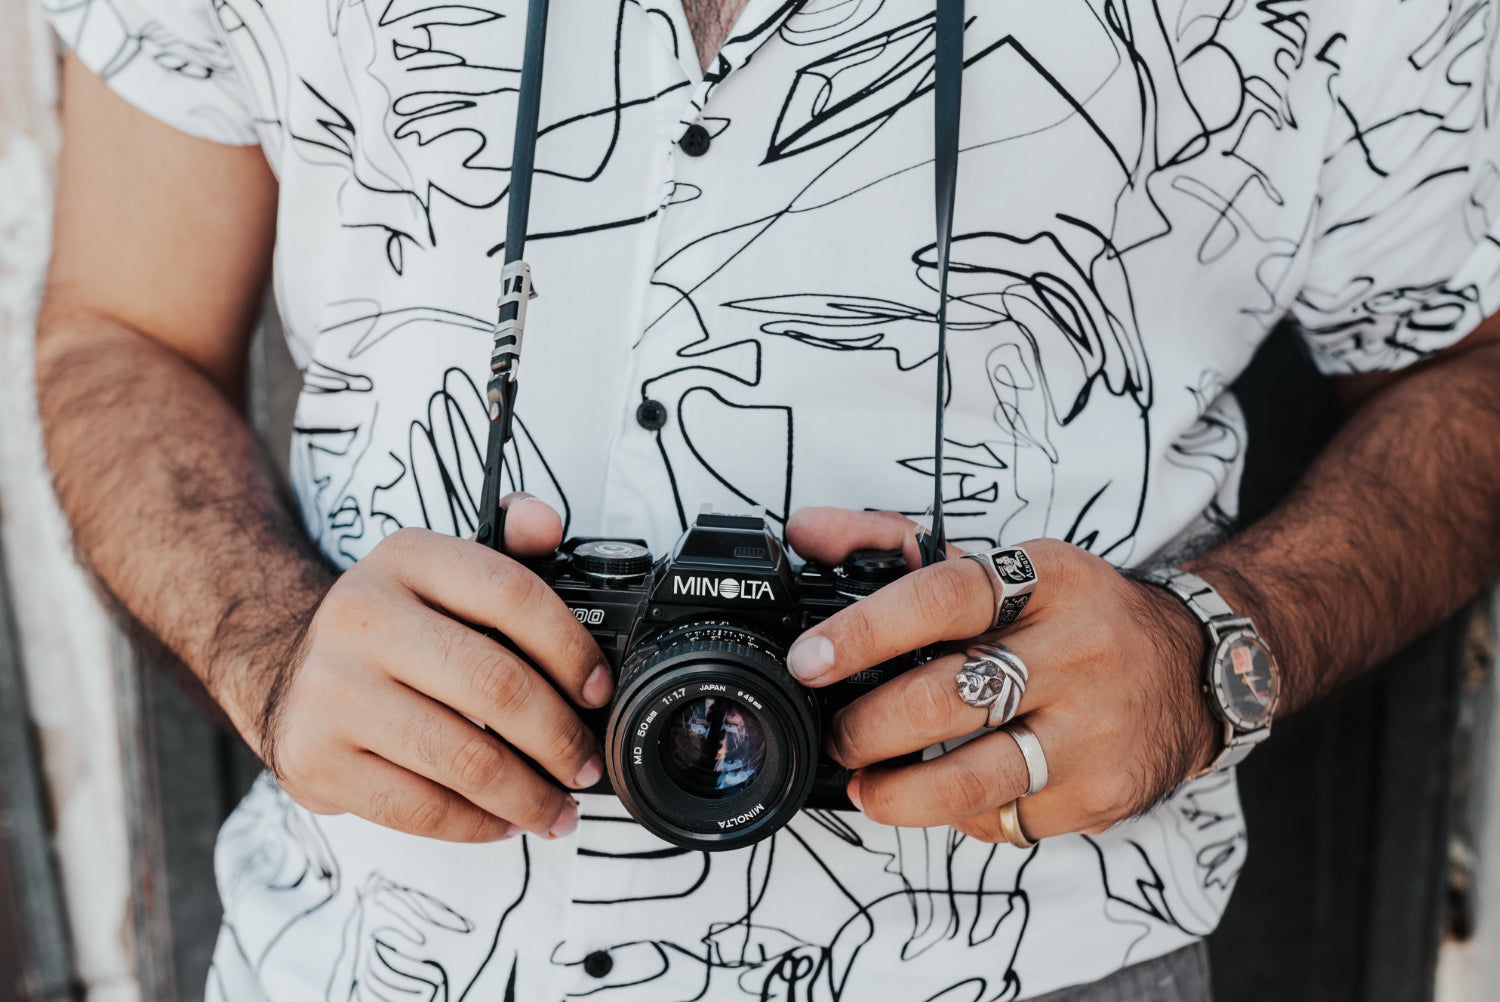 Crop of a person's torso. He is holding a digital camera